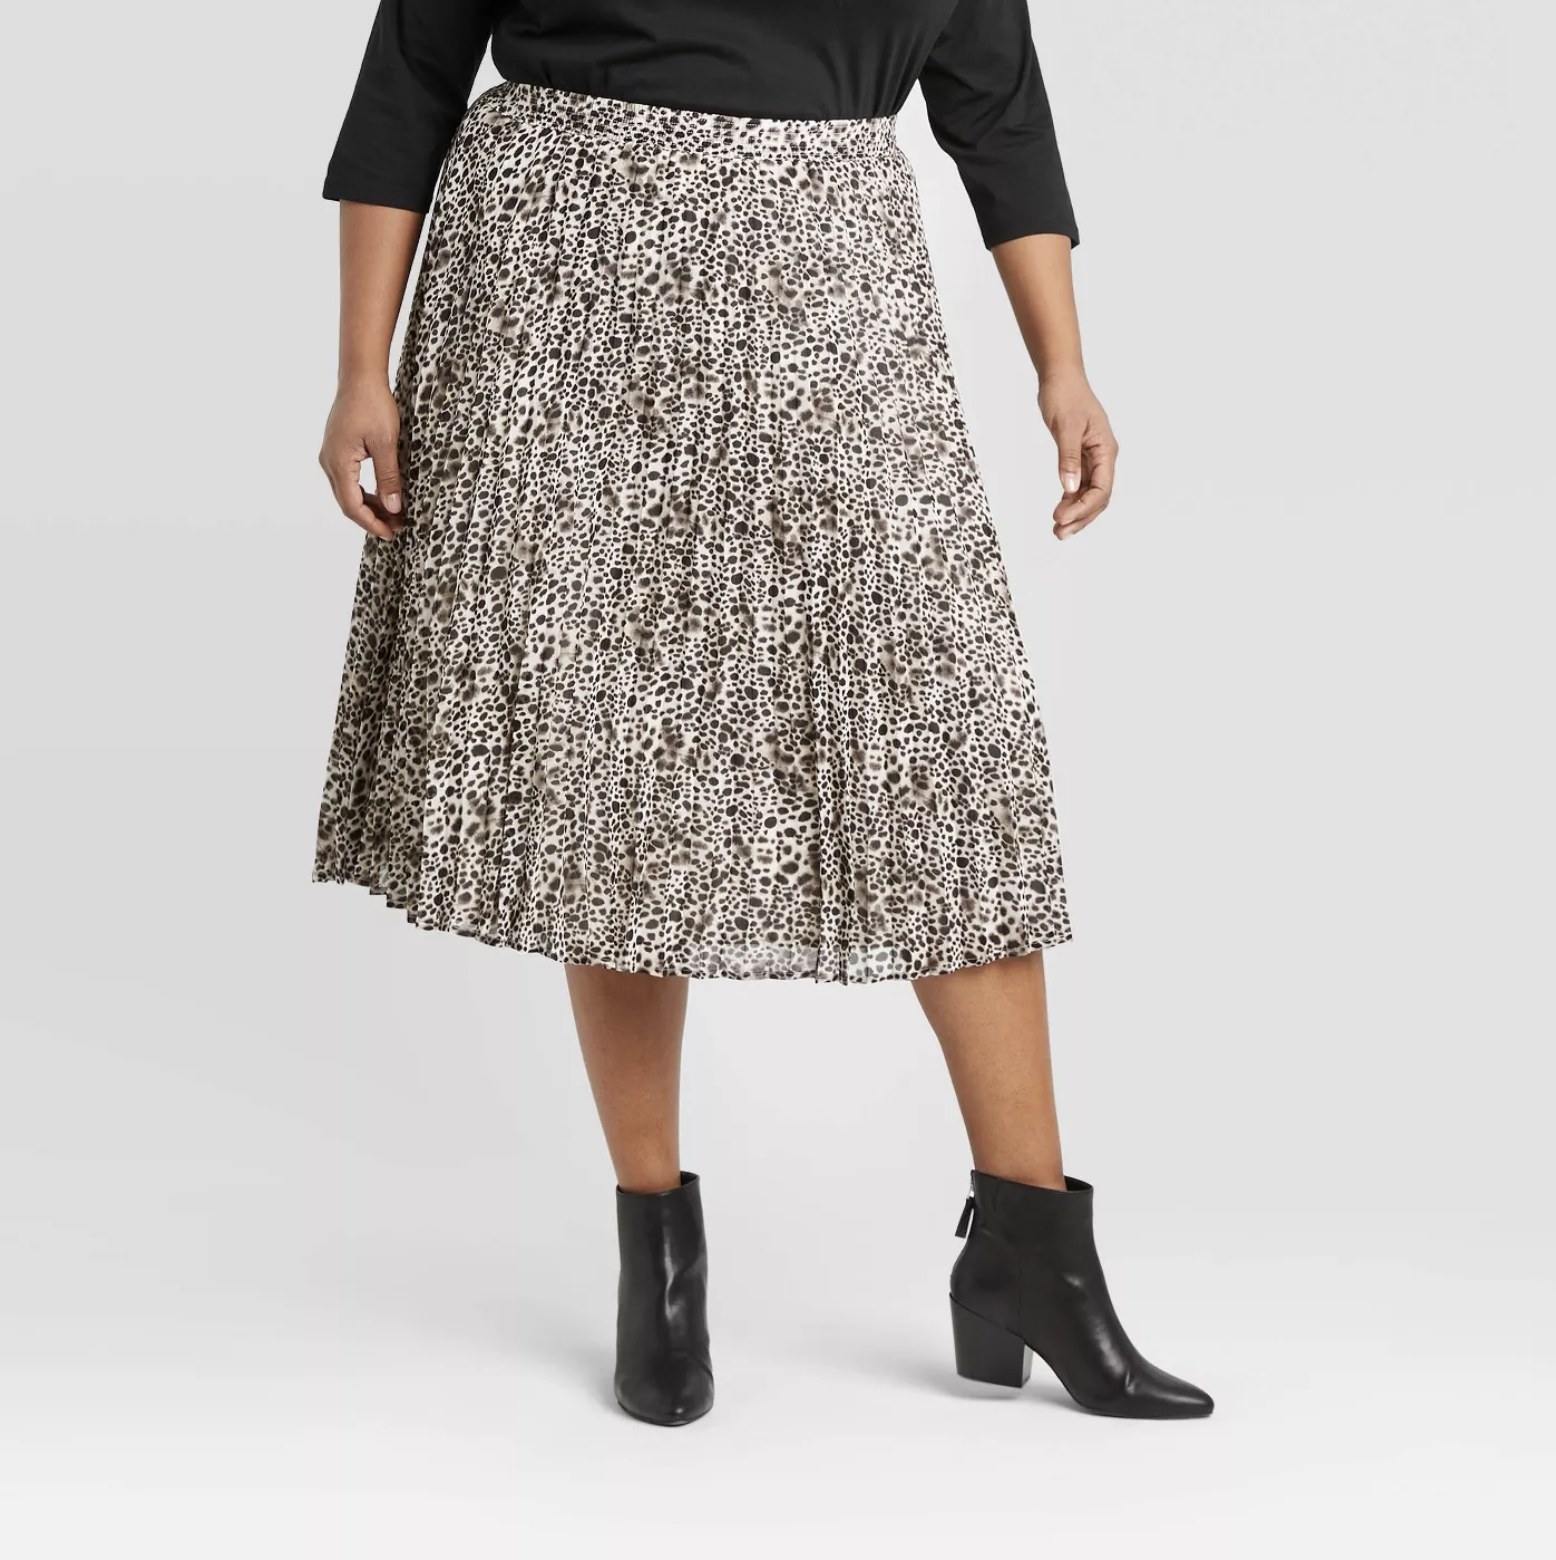 Model is wearing a cream leopard print pleated midi skirt with a pair of black ankle-high chunky booties